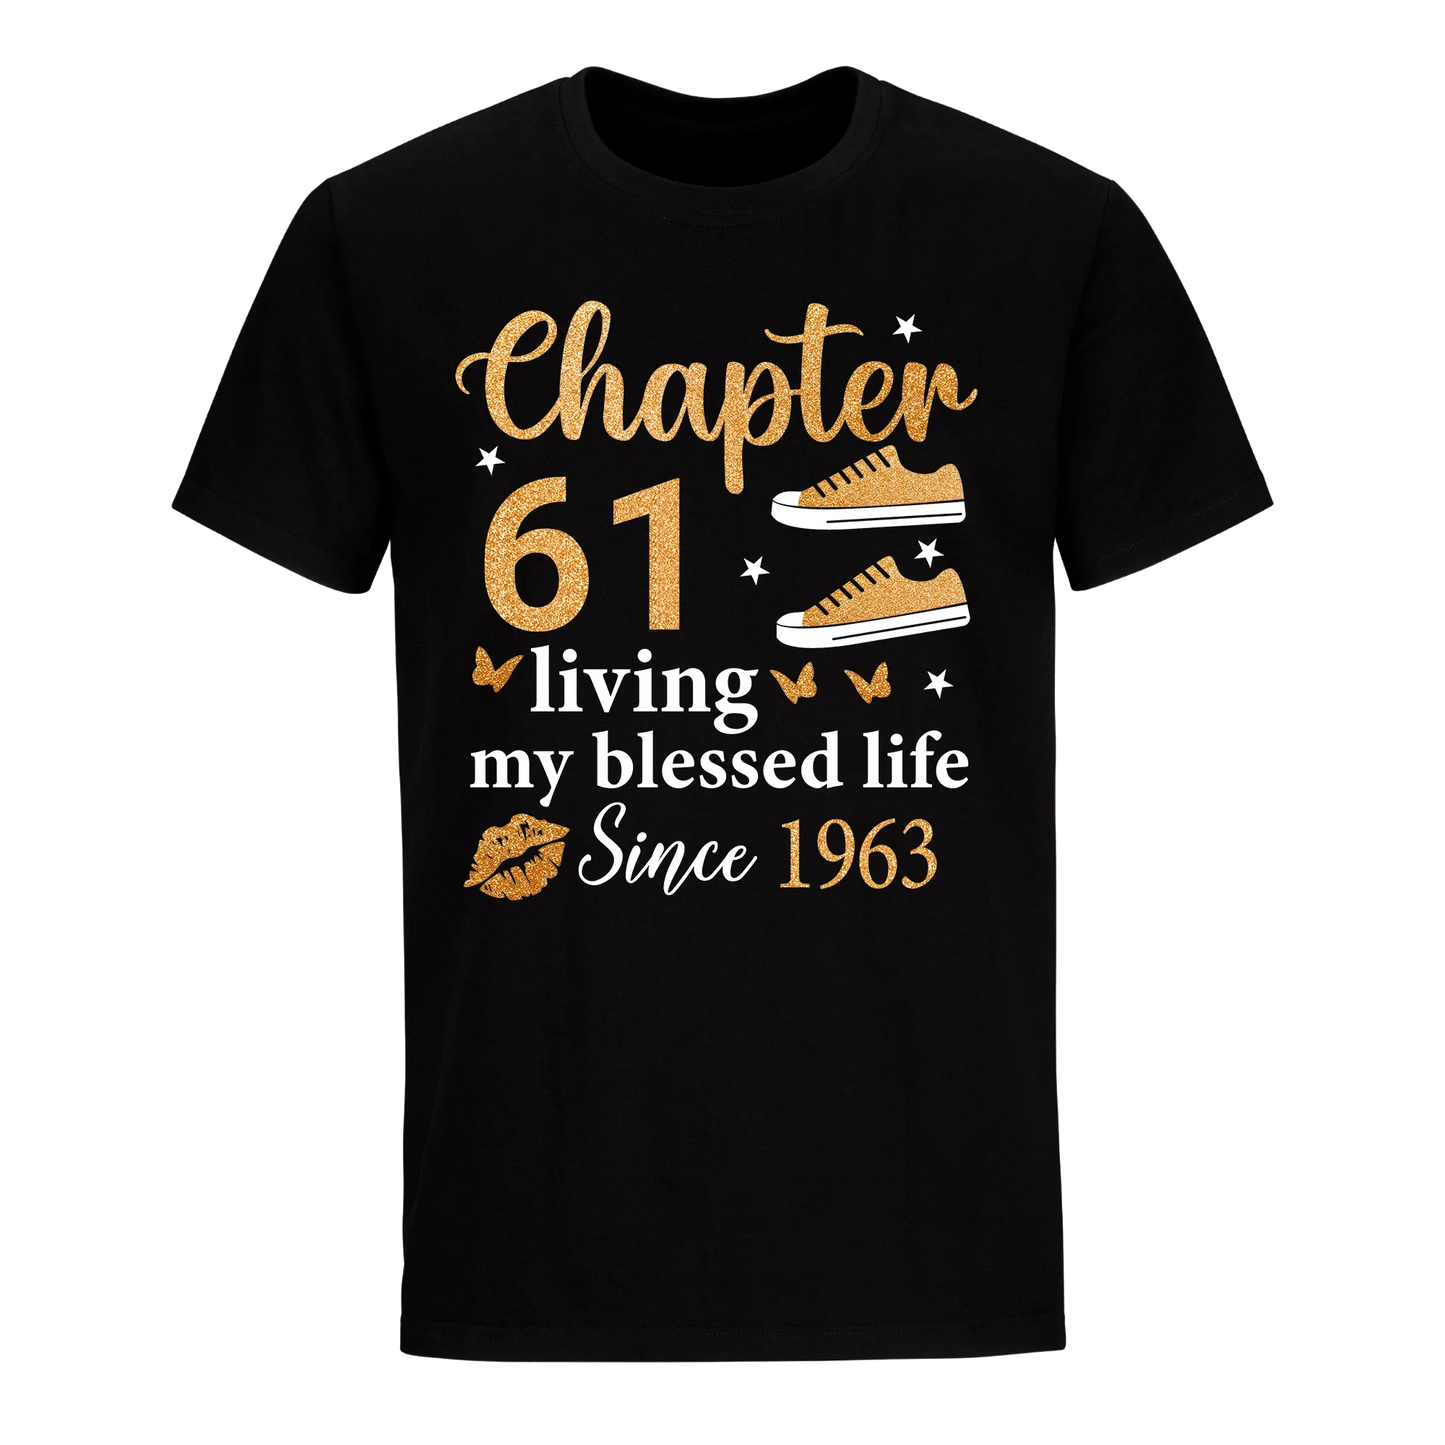 CHAPTER 61ST LIVING MY BLESSED LIFE SINCE 1963 UNISEX SHIRT